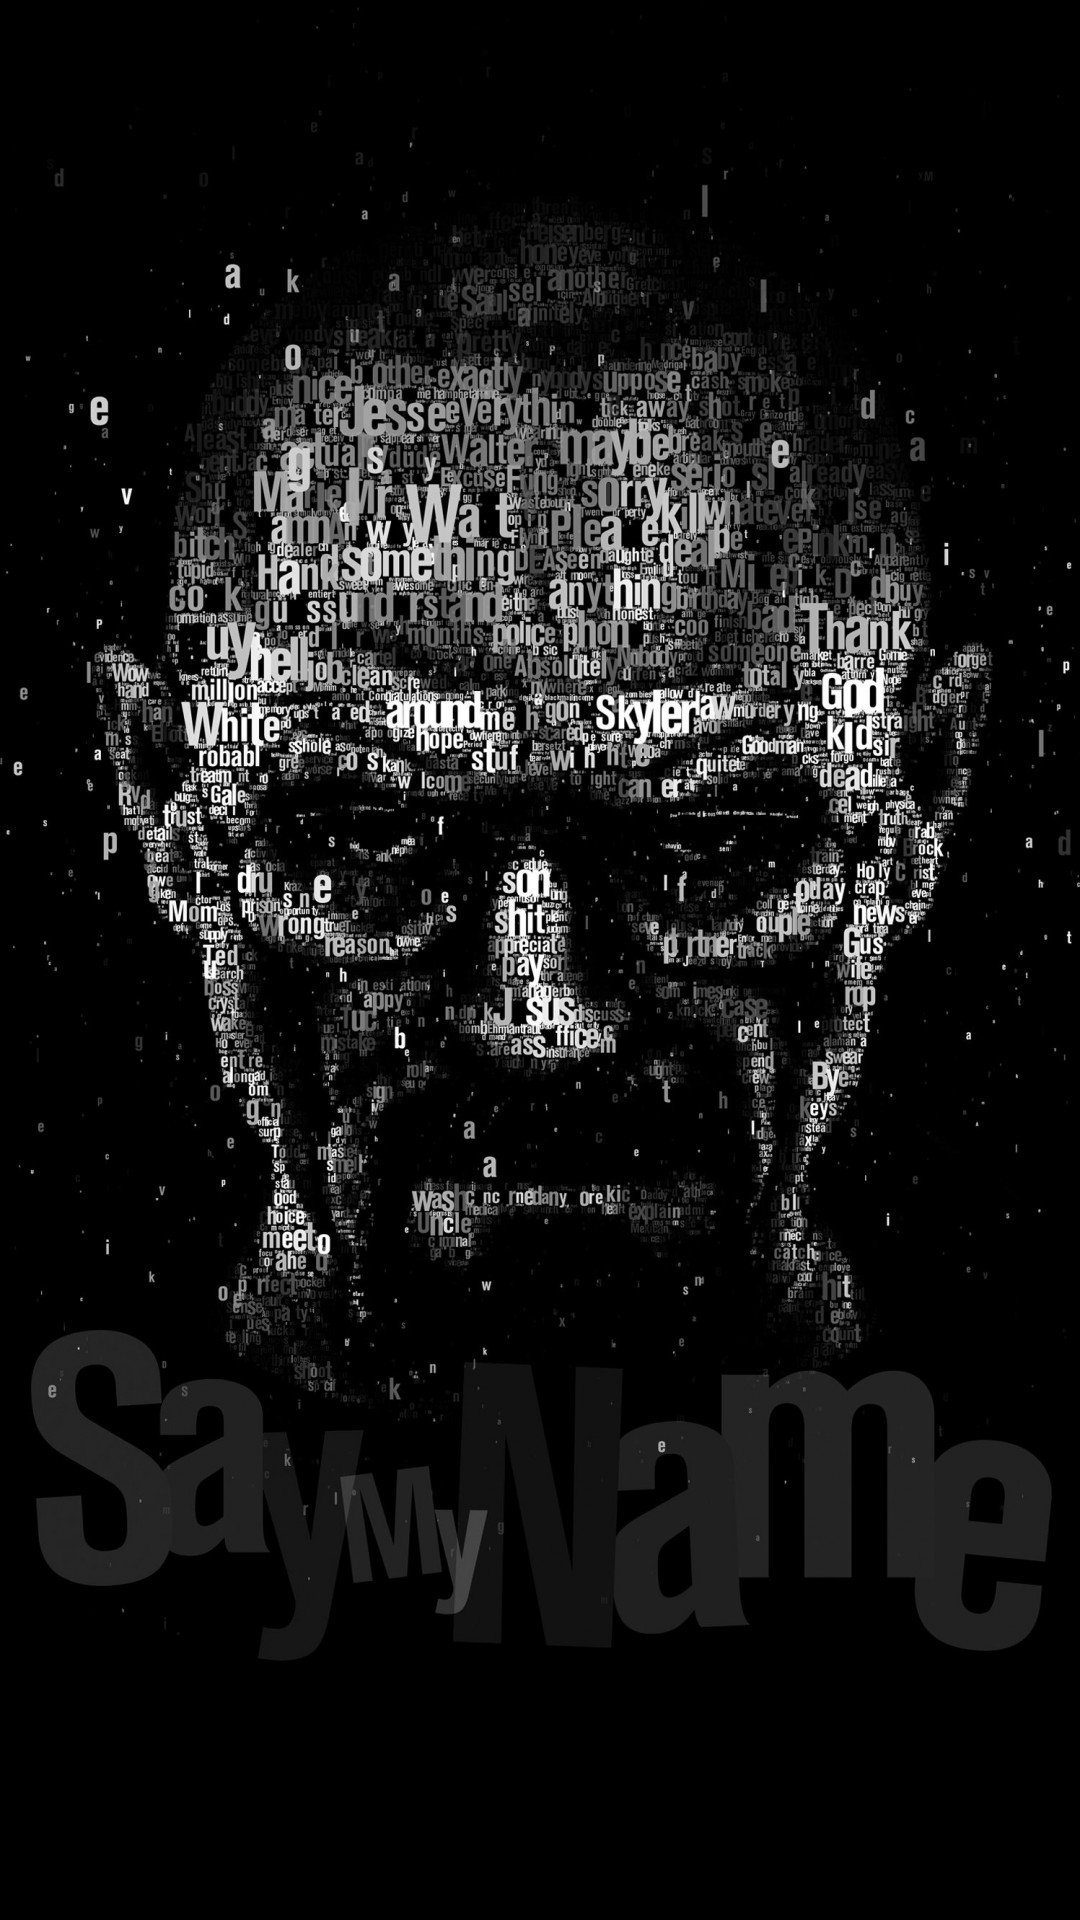 Say My Name - Typography Art Wallpaper for SAMSUNG Galaxy S4